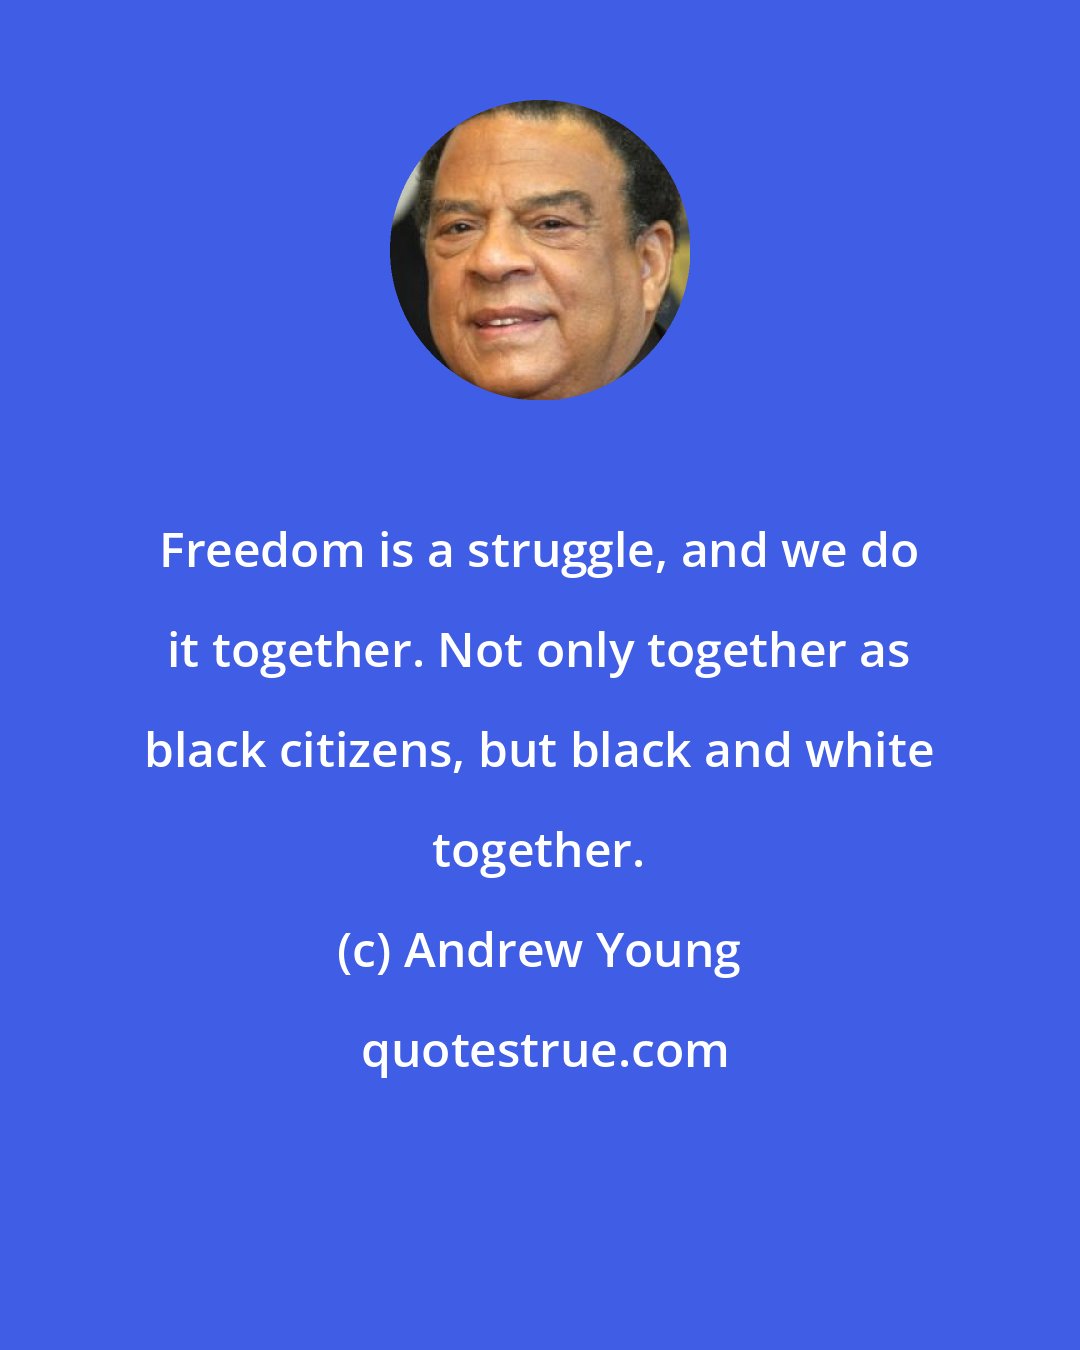 Andrew Young: Freedom is a struggle, and we do it together. Not only together as black citizens, but black and white together.